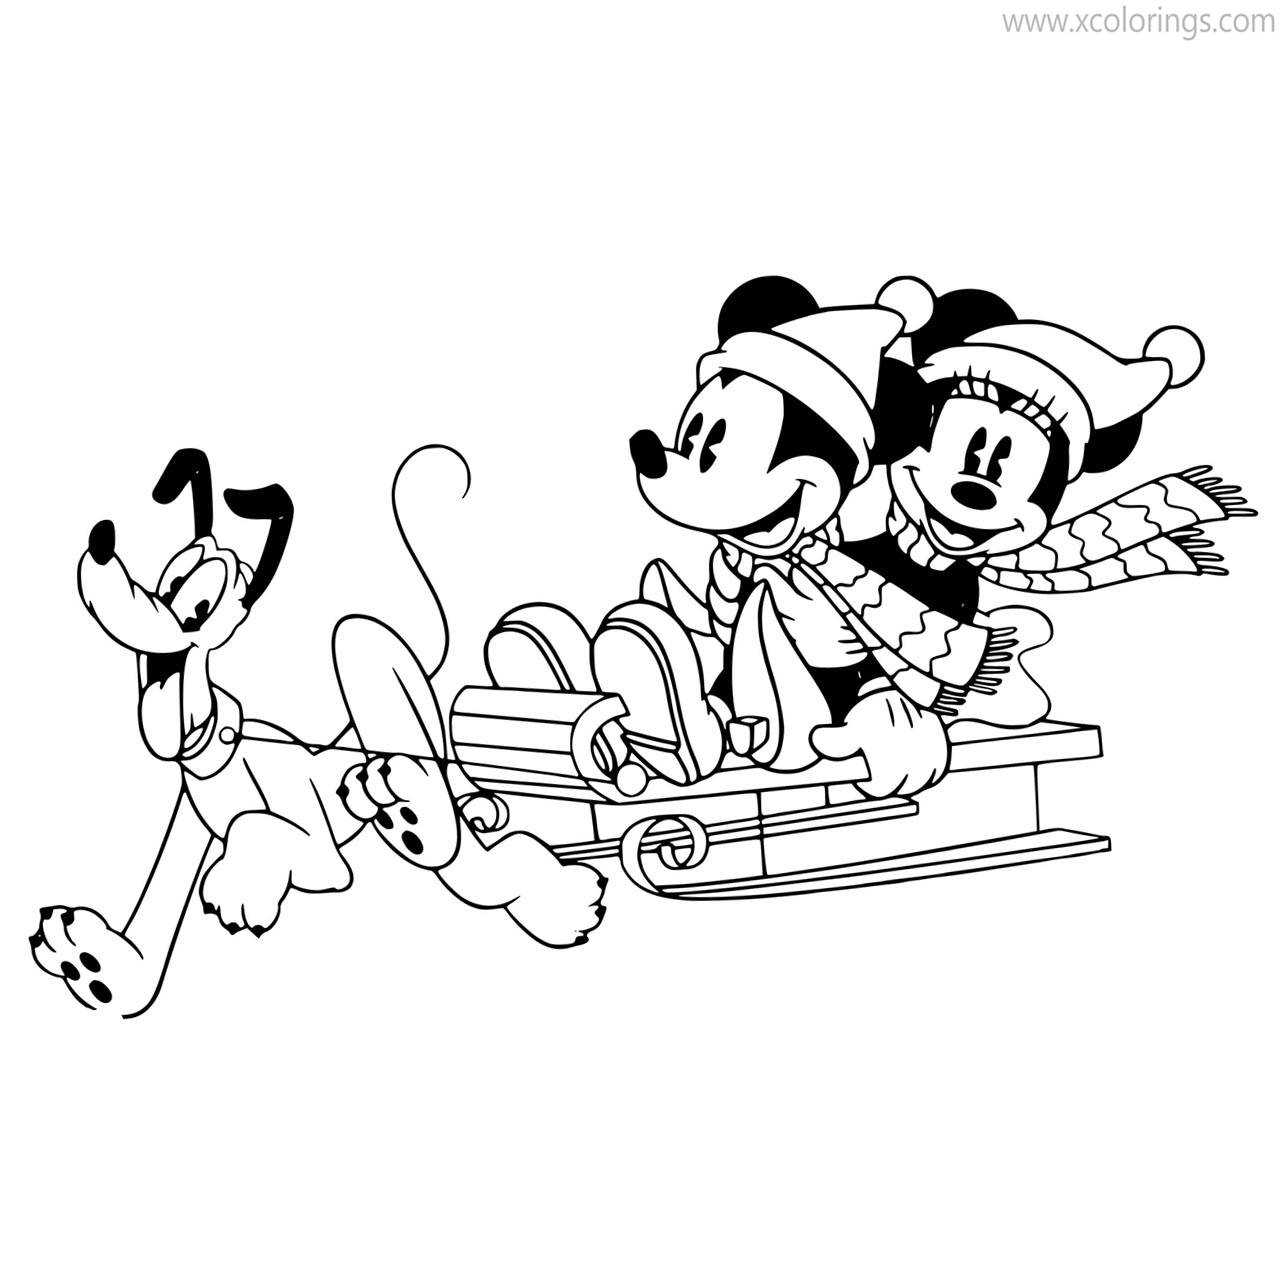 Free Mickey Mouse Christmas Coloring Pages Minnie Mickey and Pluto printable